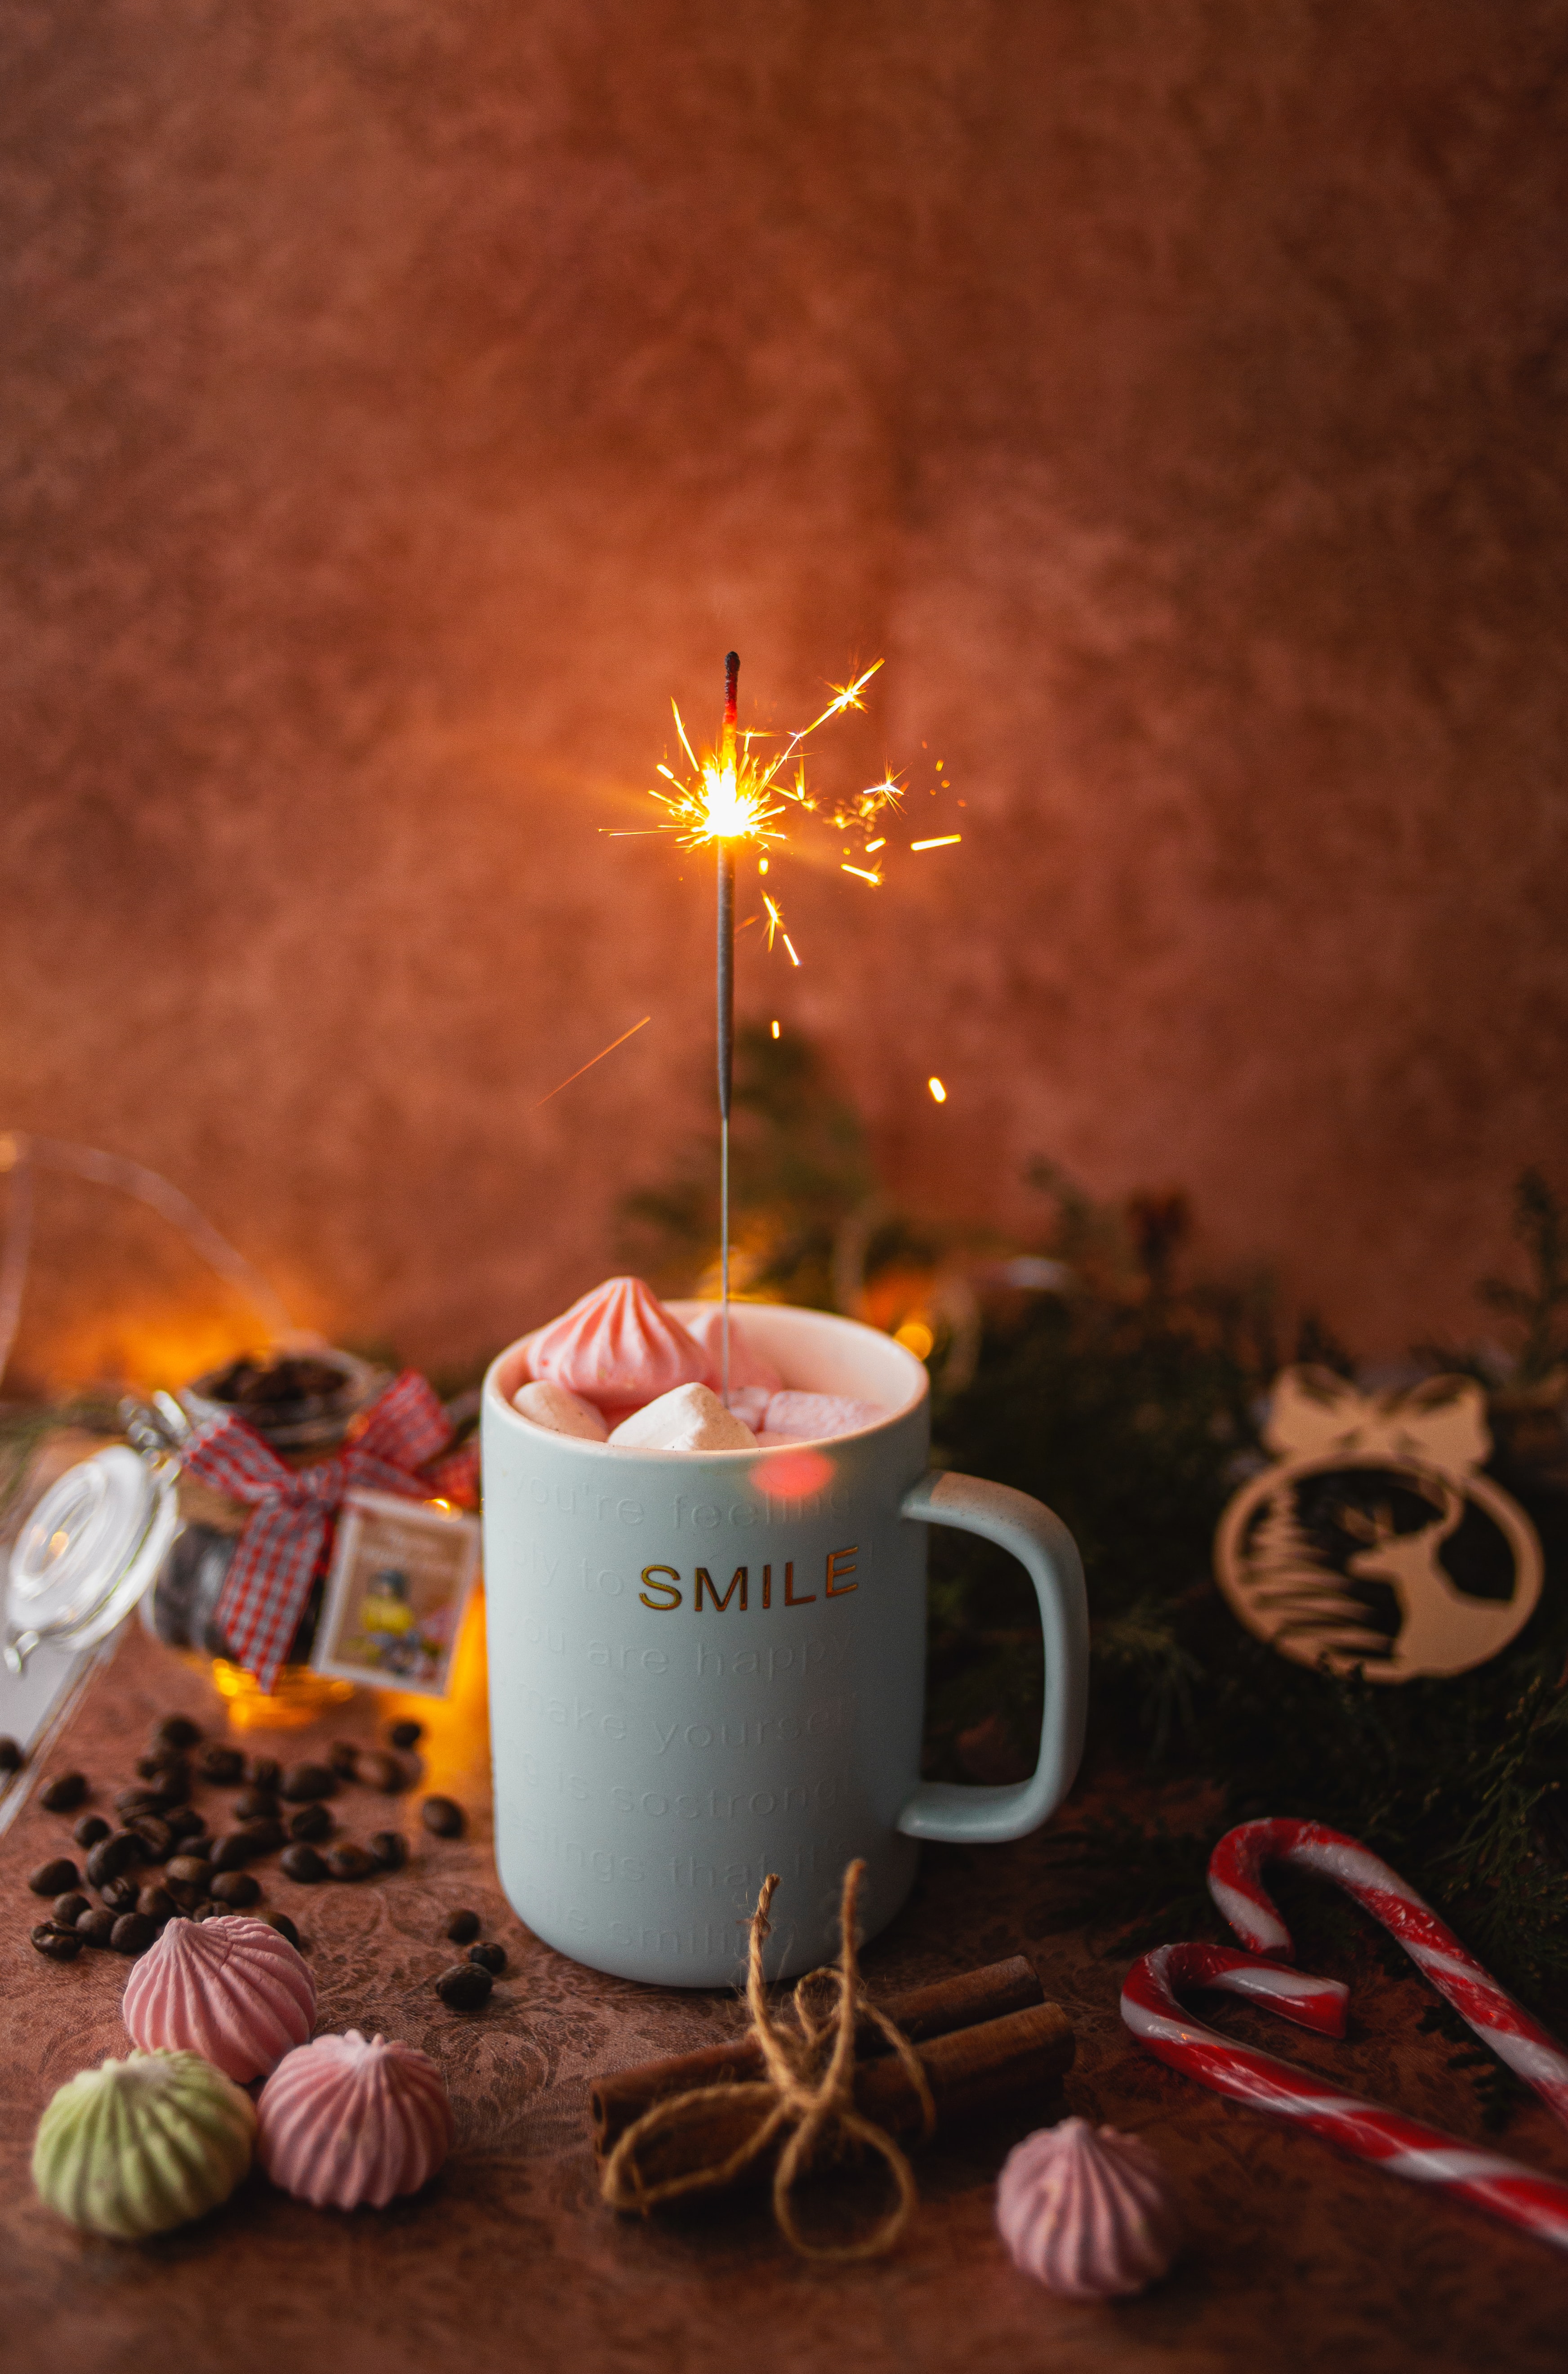 mug, miscellanea, cup, holiday, sparks, miscellaneous, marshmallow, bengal lights, sparklers, zephyr Full HD